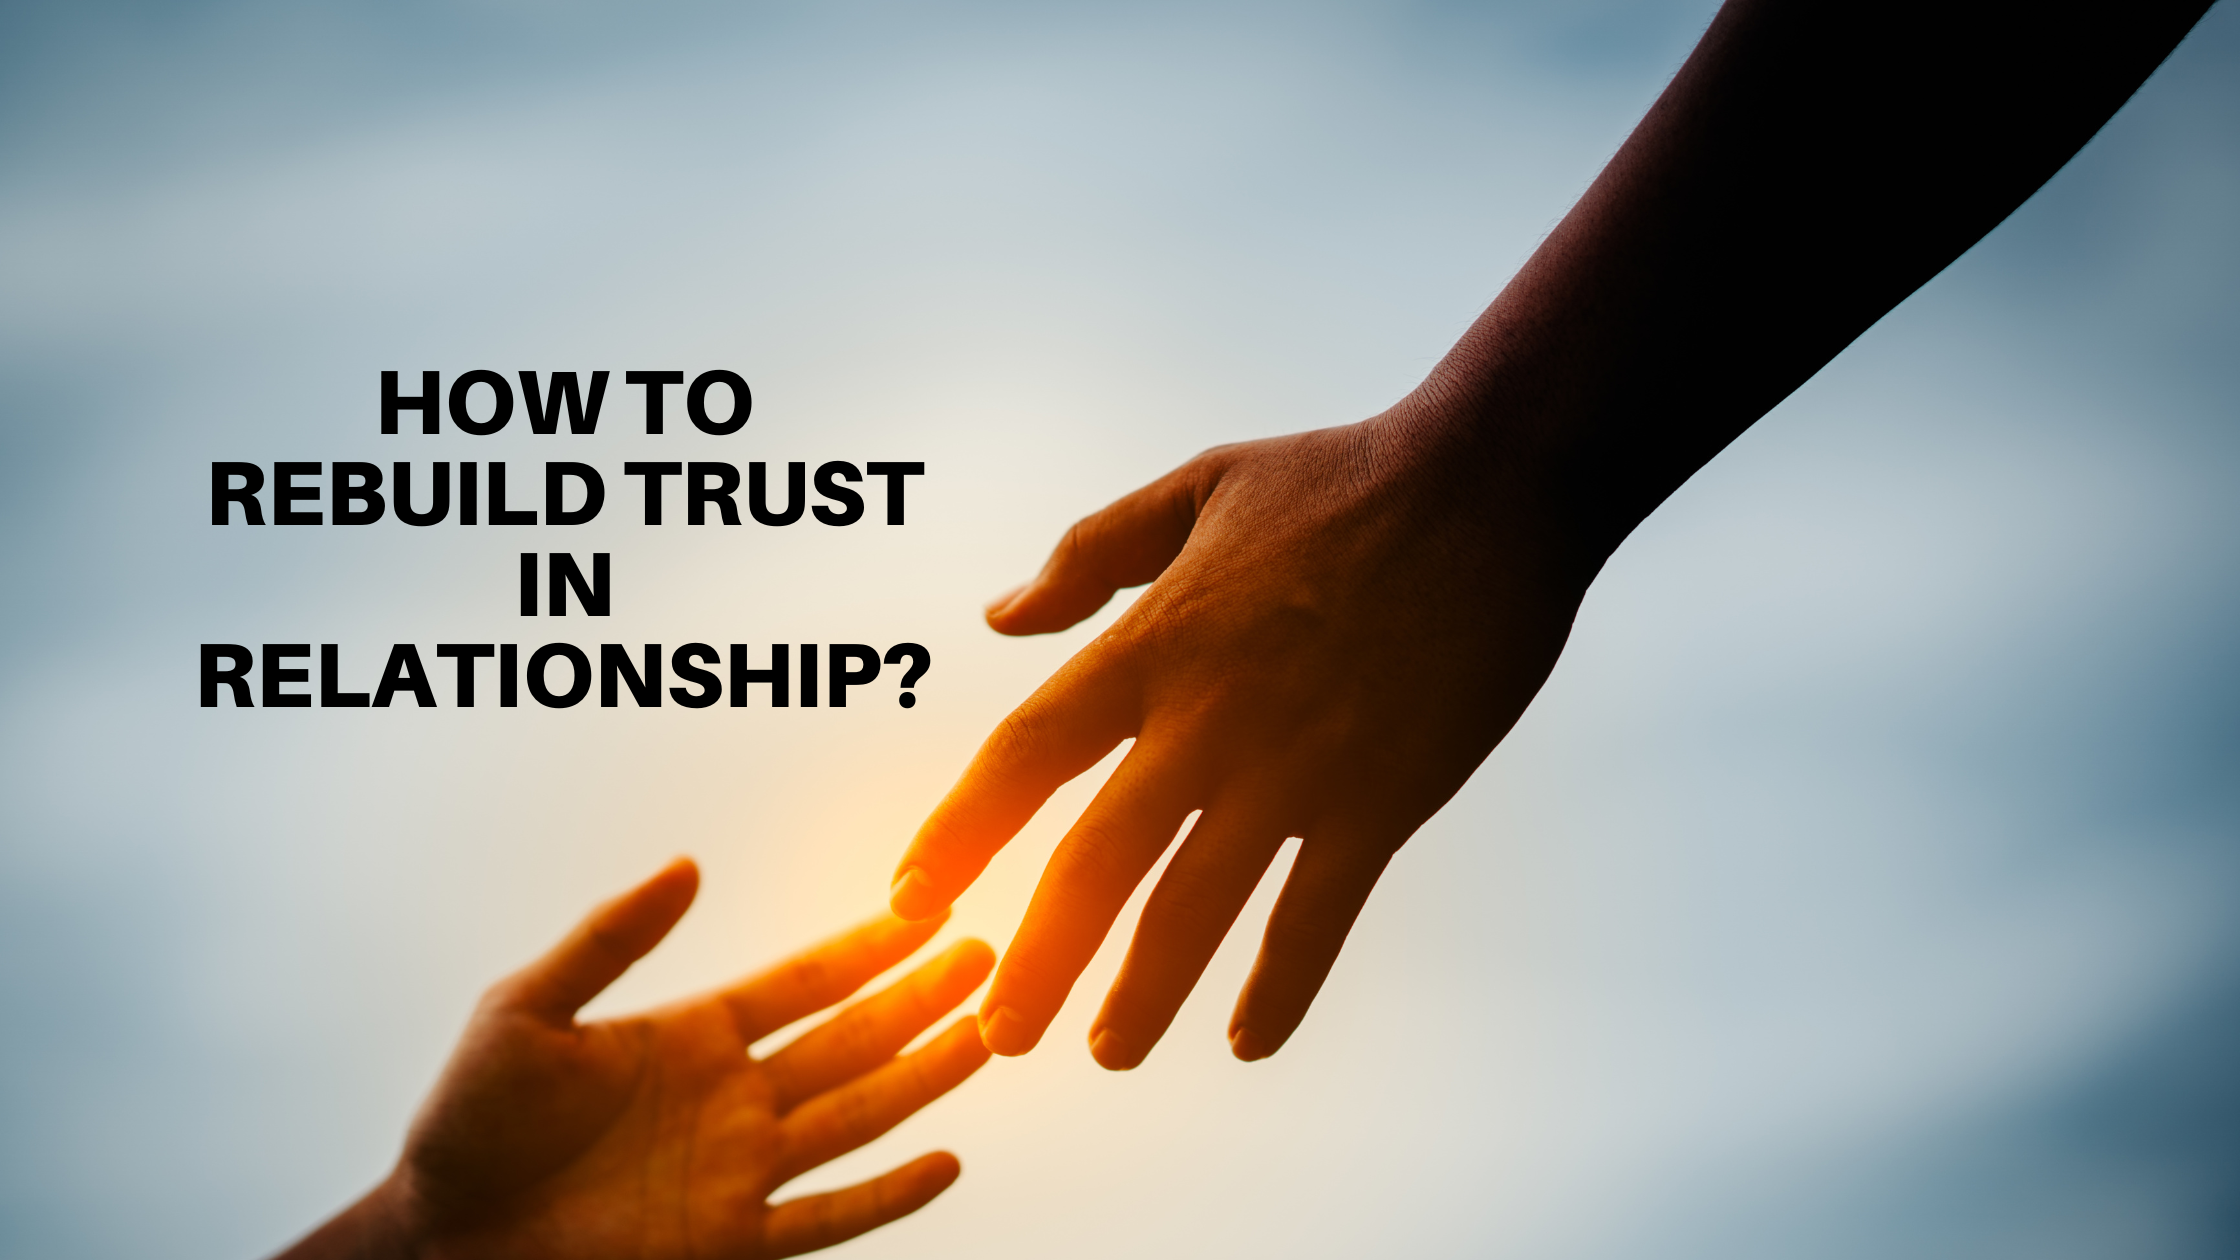 How to Rebuild Trust in Relationship